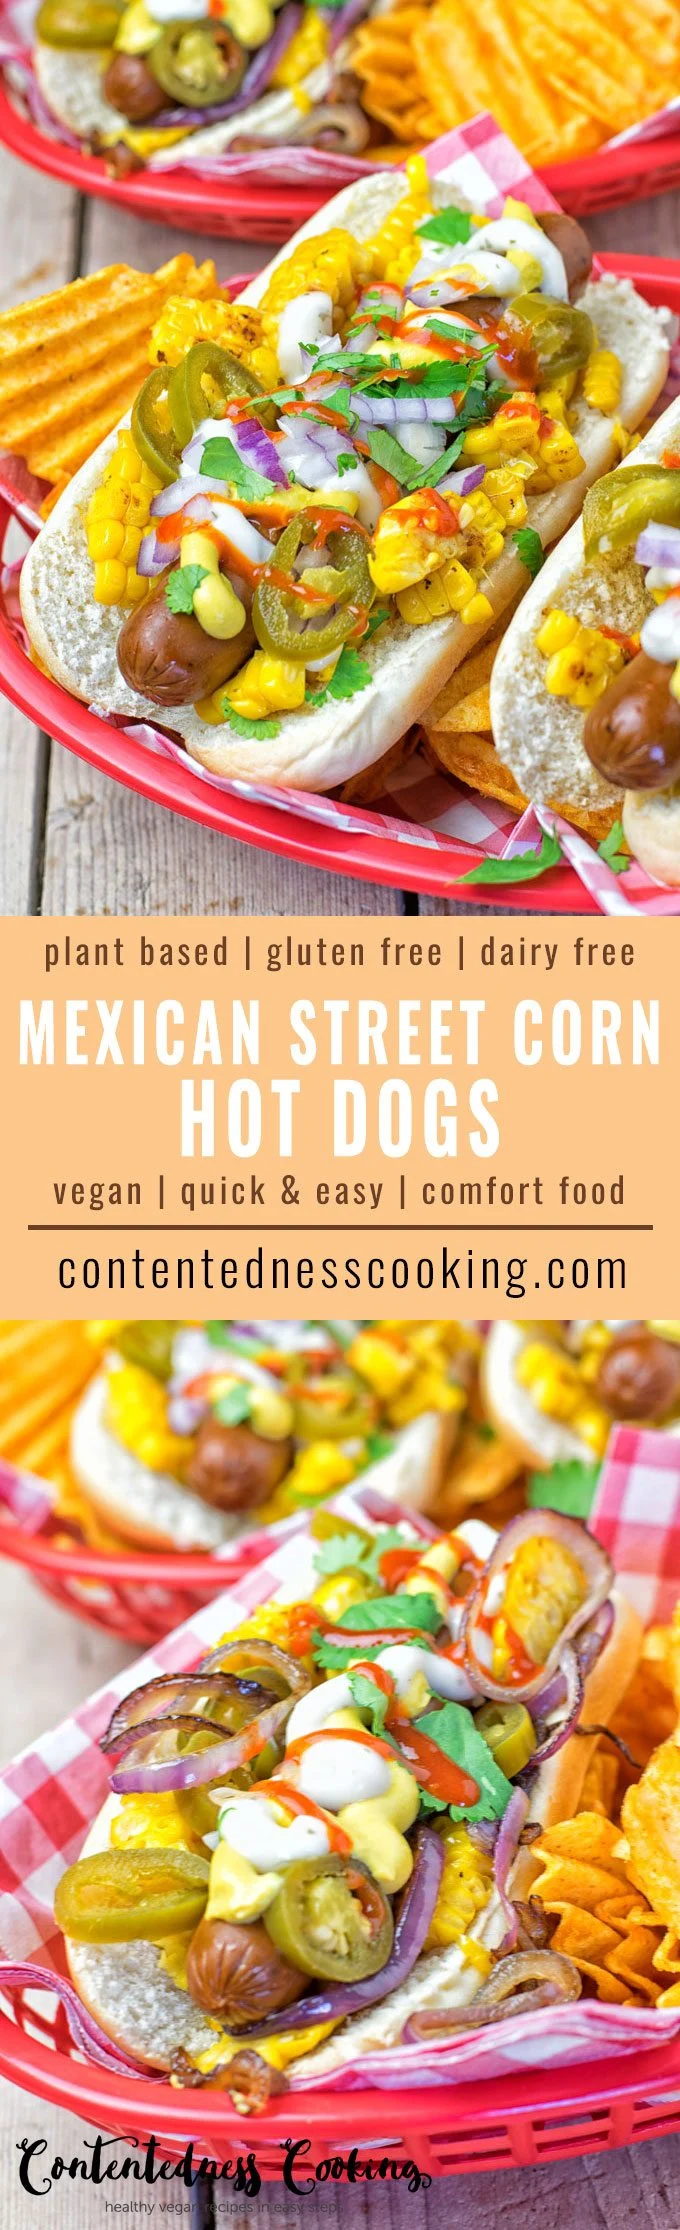 Collage of two picture of the Mexican Street Corn Hot Dogs with recipe title text.